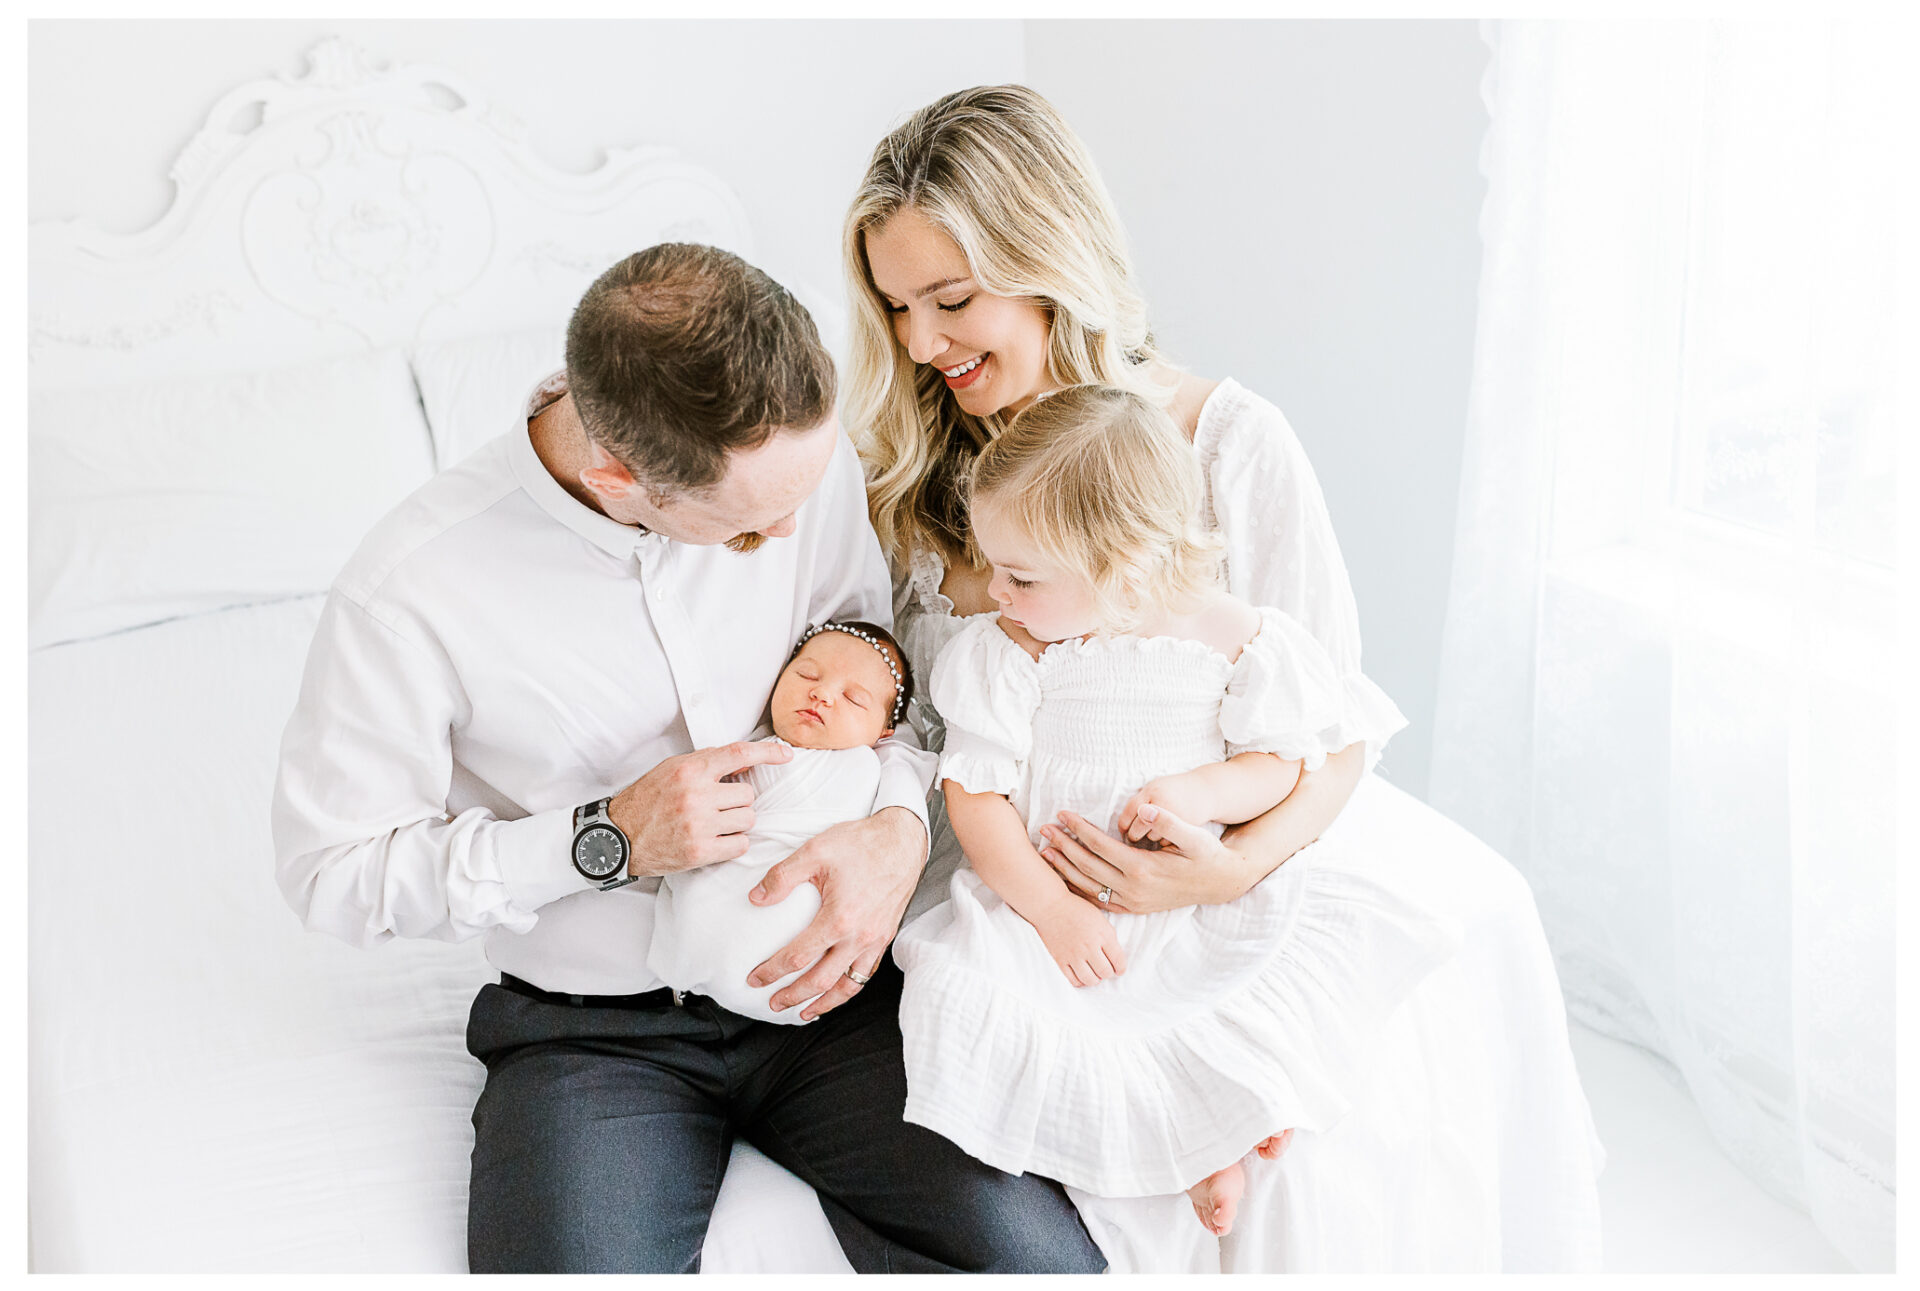 Winter Freire Photography | Dayton, Ohio Newborn Session | Parents sitting together holding newborn baby and older sister